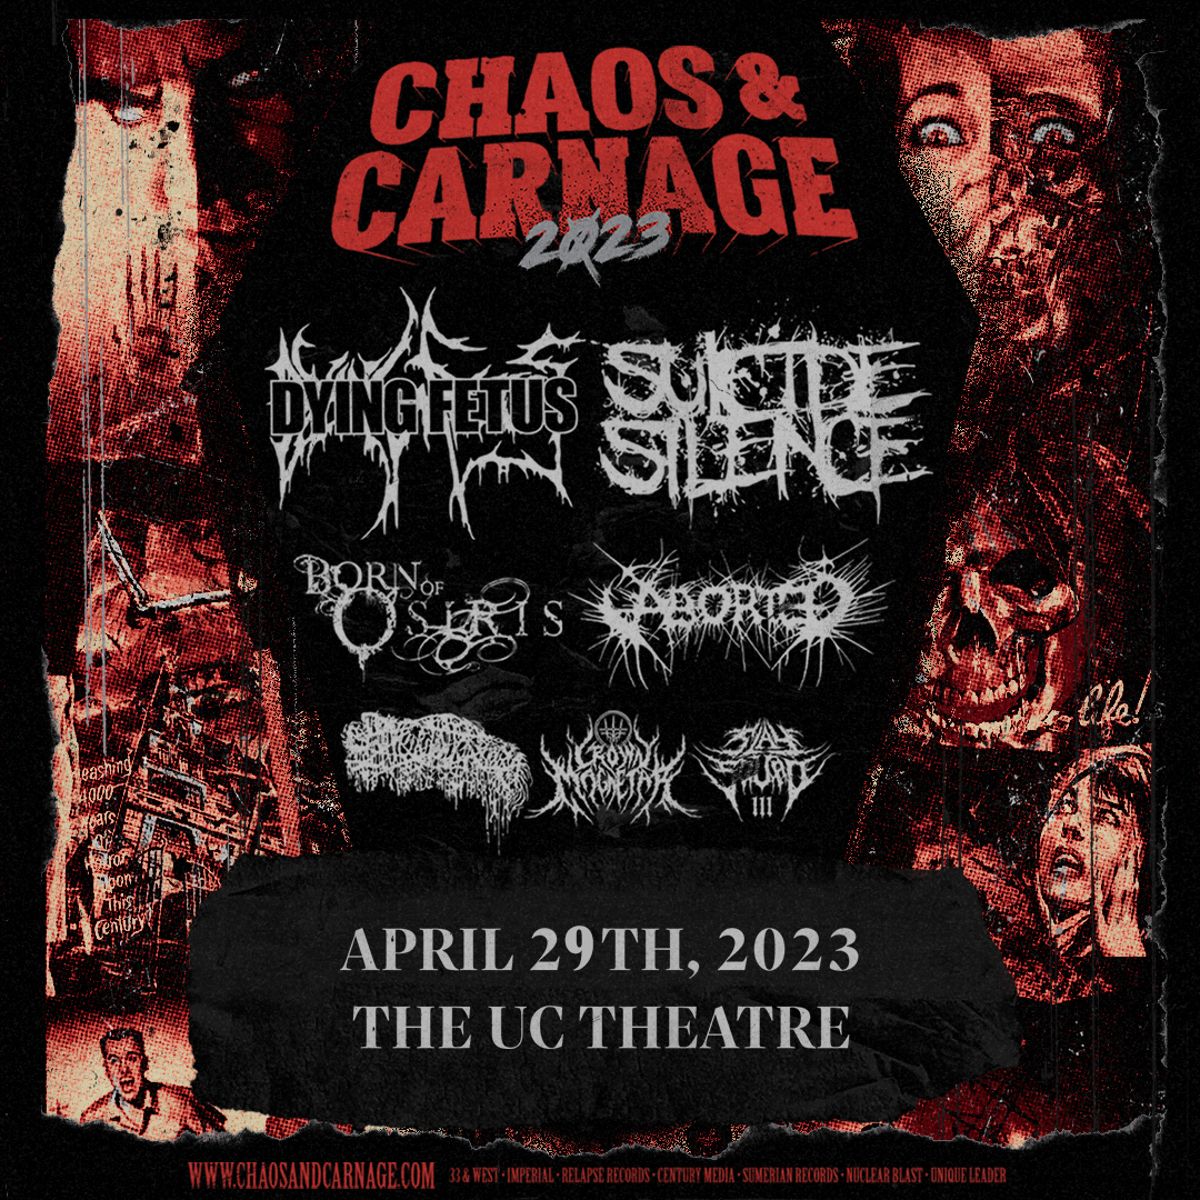 CHAOS & CARNAGE 2023 w/ DYING FETUS, SUICIDE SILENCE + PLUS SPECIAL GUESTS 